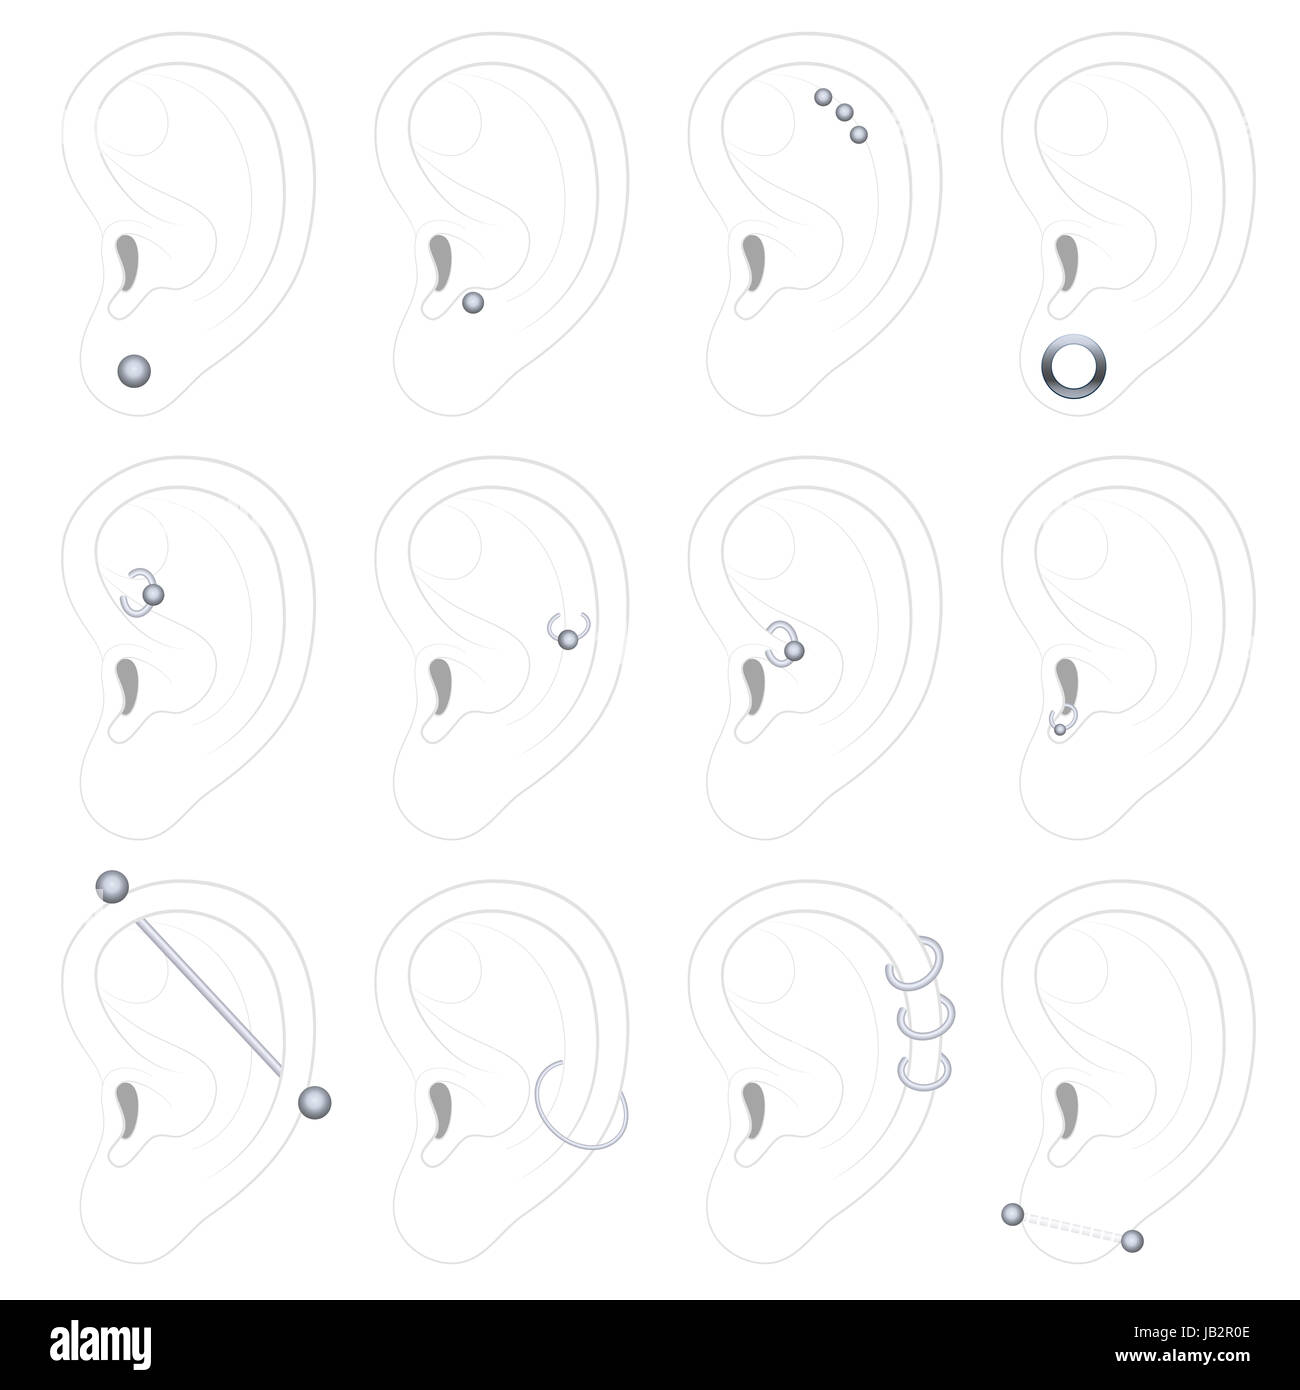 Ear piercing examples - twelve different types - illustration on white background. Stock Photo